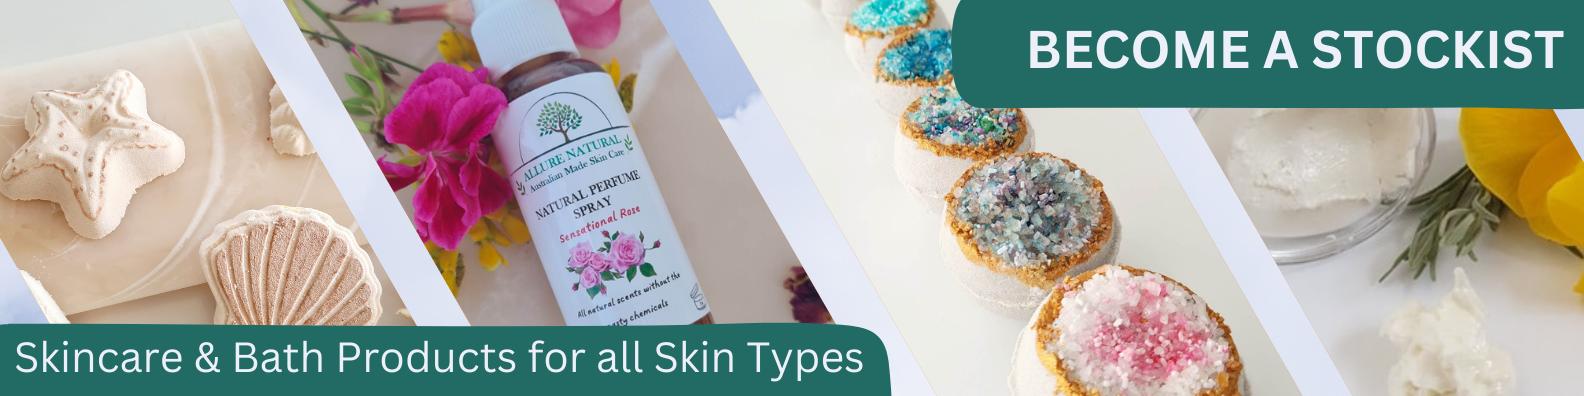 Wholesale Skincare and Bath Products - Bath Bombs, soaps, natural products, sensitive skin products.